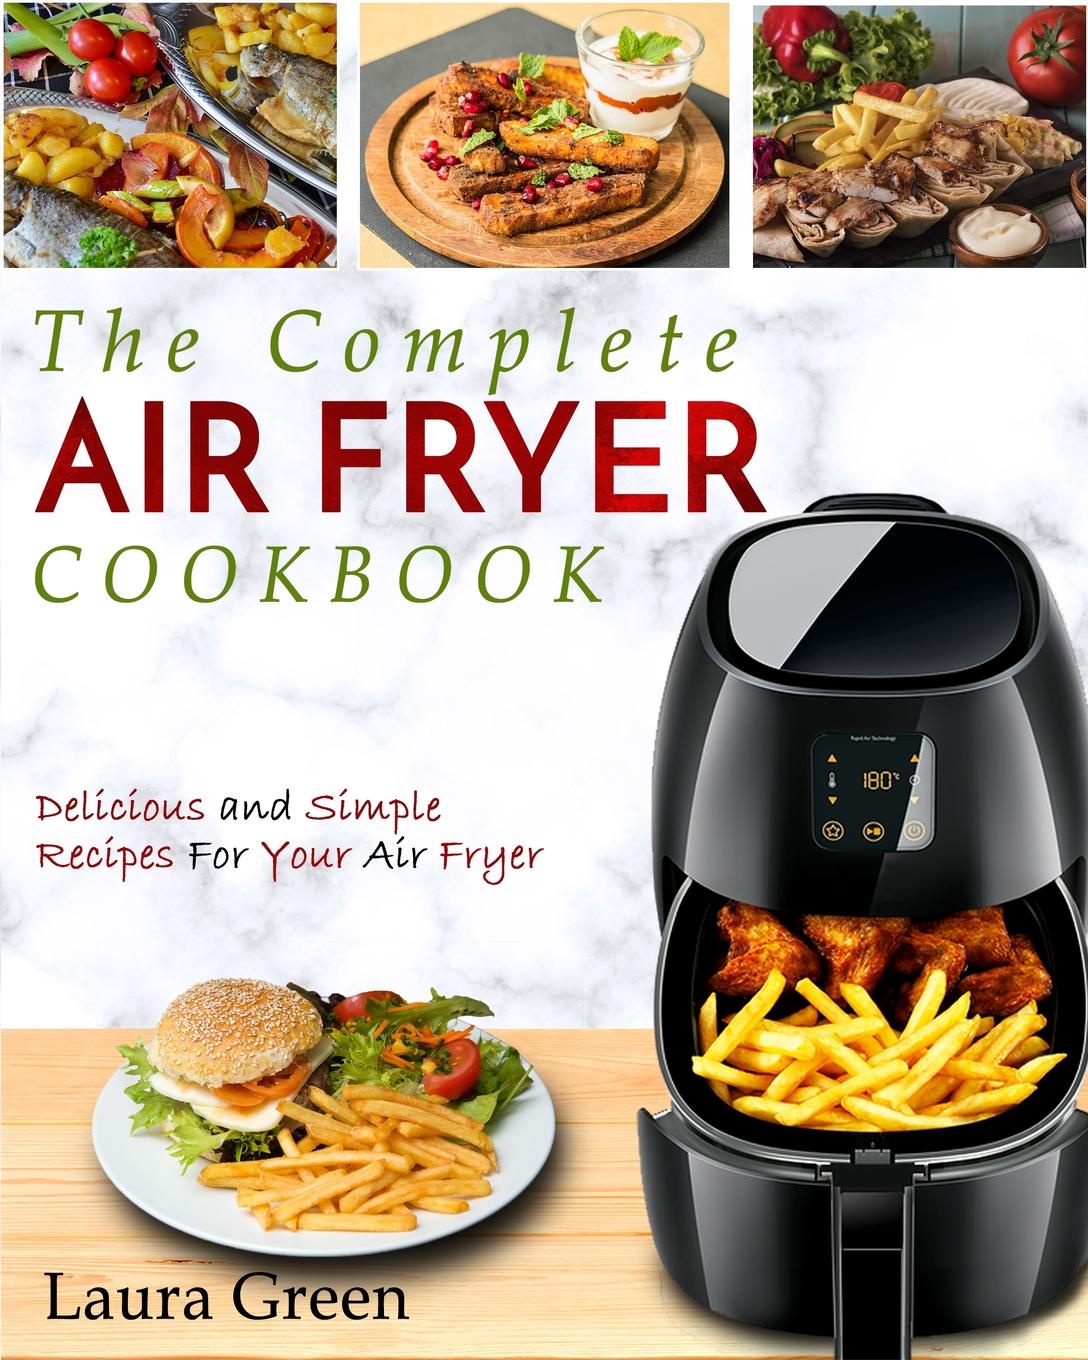 Air Fryer Cookbook. The Complete Air Fryer Cookbook - Delicious and Simple Recipes For Your Air Fryer